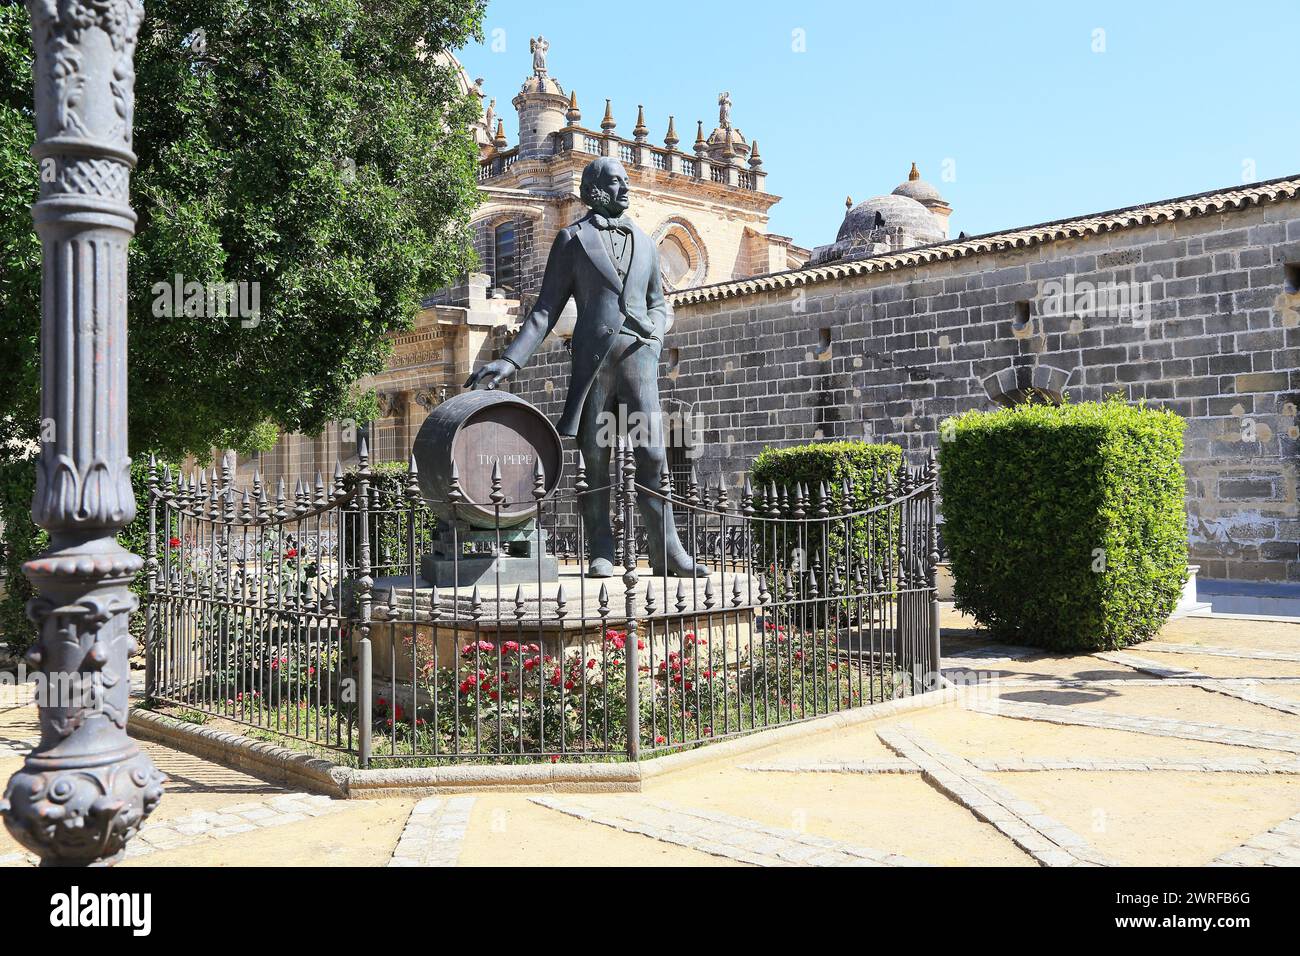 JEREZ DE LA FRONTERA, SPAIN - MAY 22, 2017: This is a monument to the founder of the Tio Pepe sherry company in the square near the Cathedral. Stock Photo